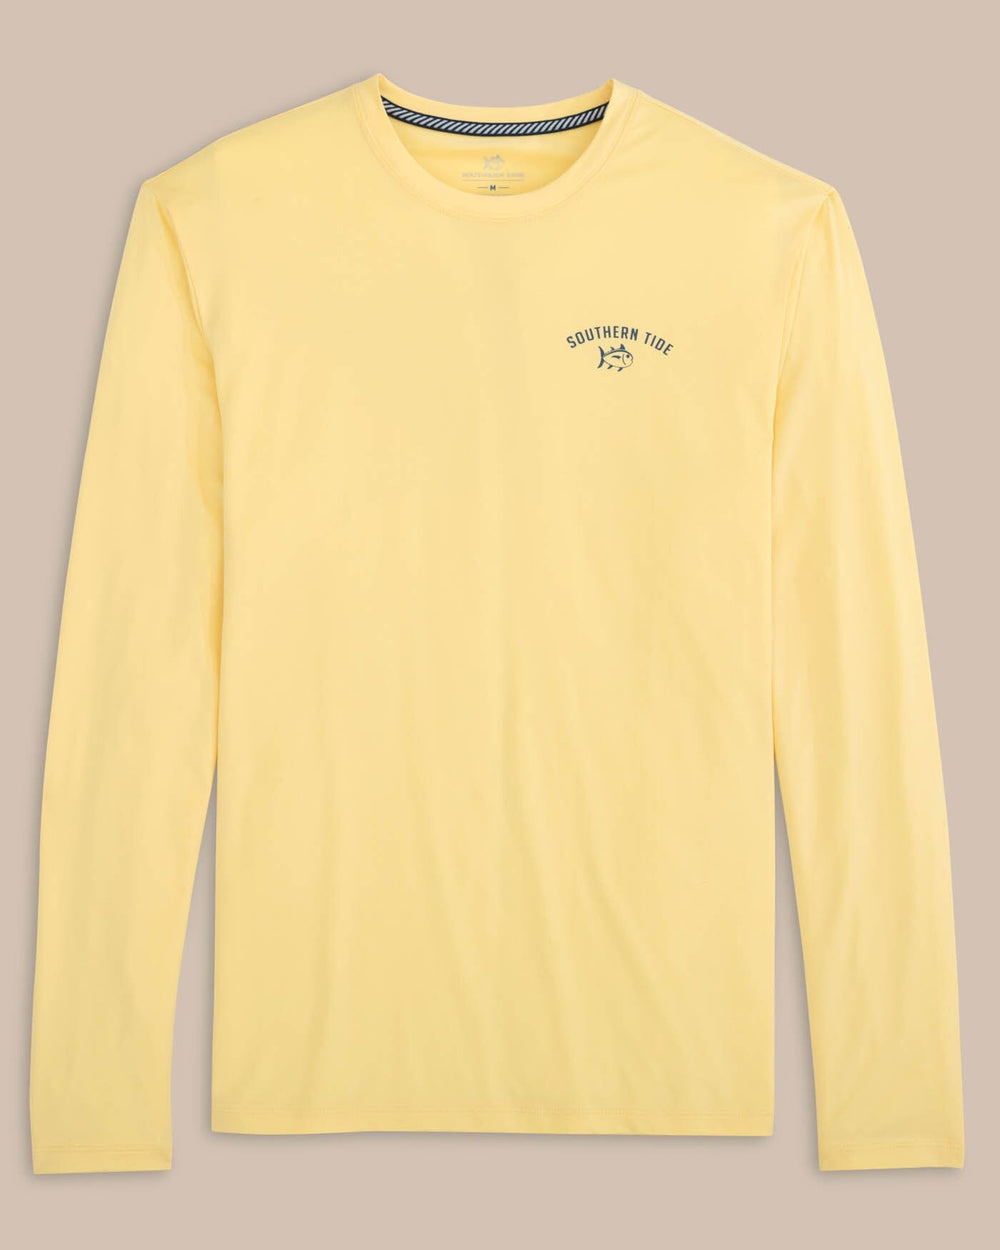 The front view of the Southern Tide Sharks and Skipjacks Performance Long Sleeve T-Shirt by Southern Tide - Golden Haze Yellow